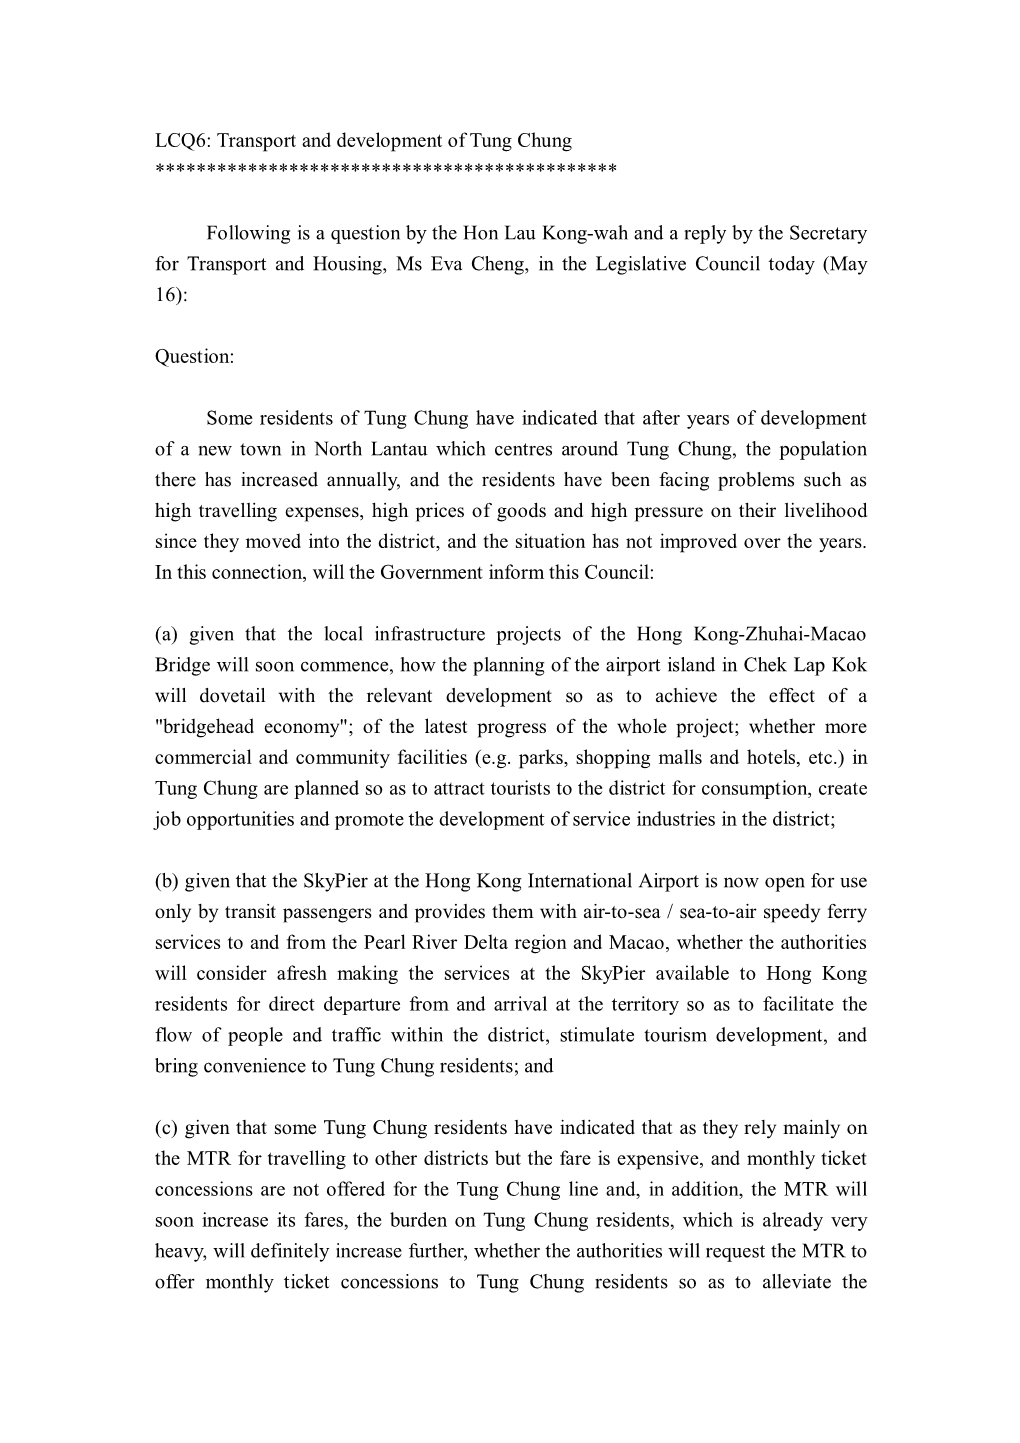 LCQ6: Transport and Development of Tung Chung *********************************************